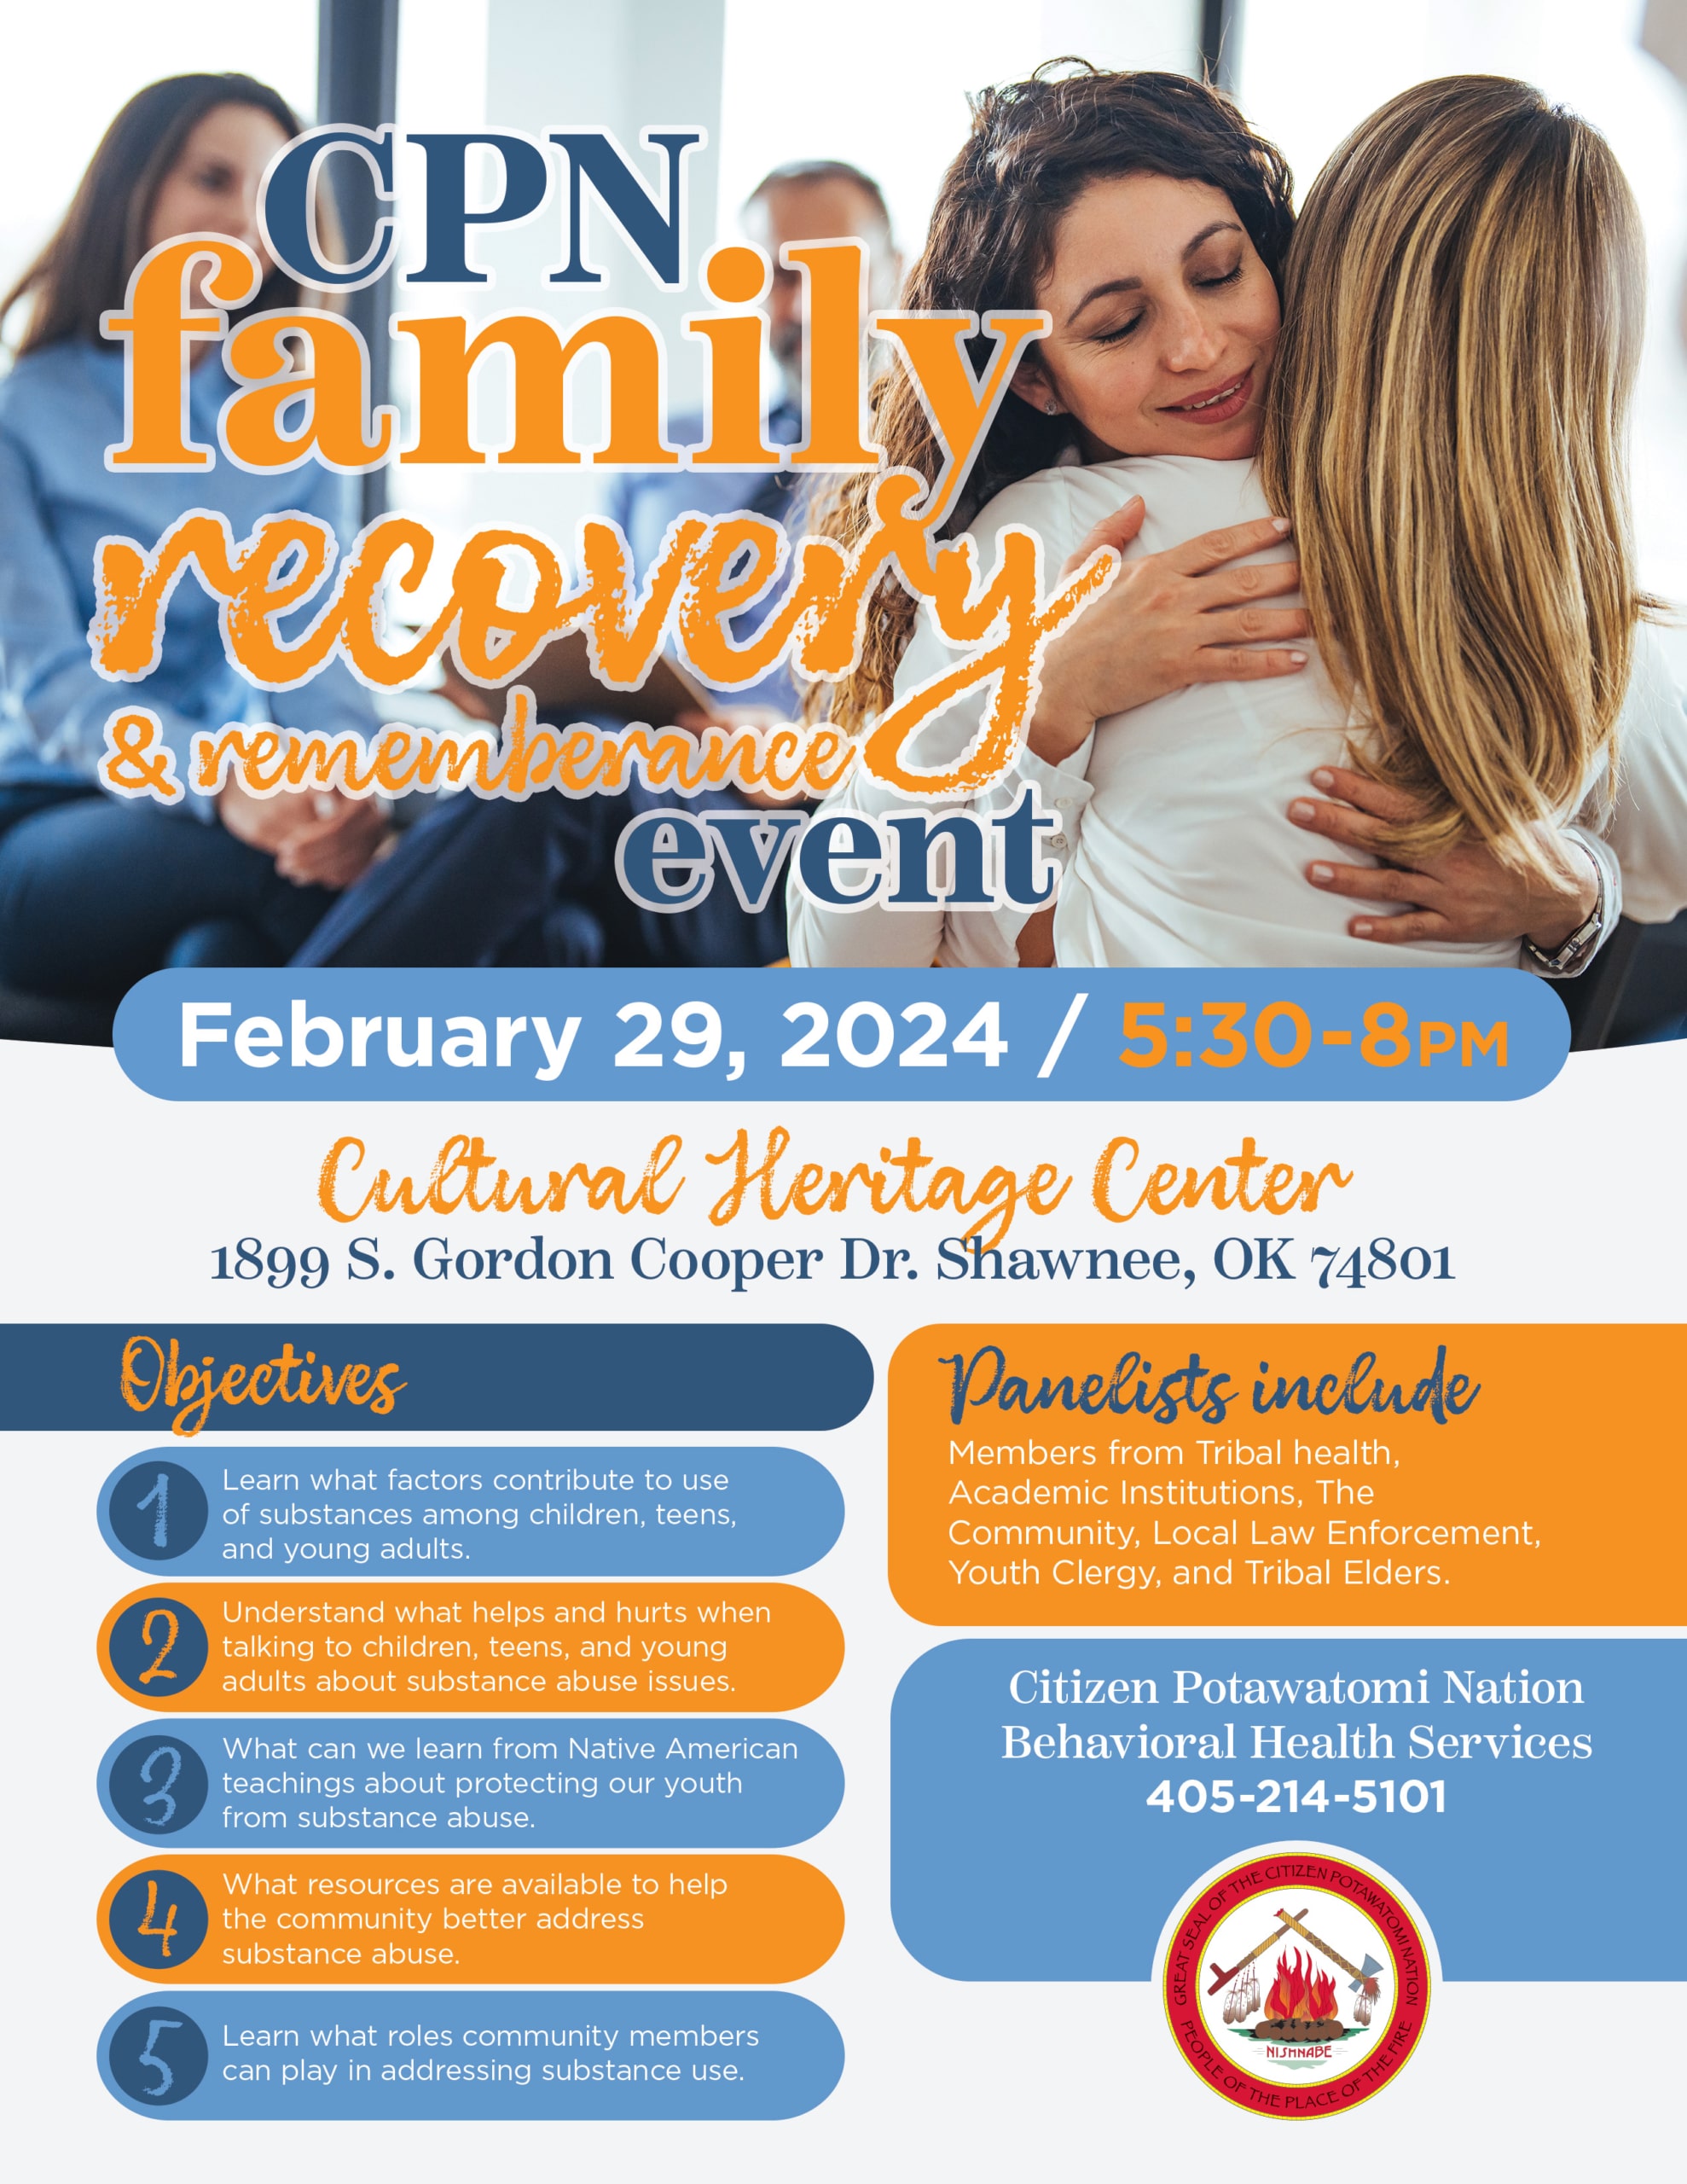 blue, navy and orange flyer advertising the Family Recovery and Remembrance event on February 29, 2024.